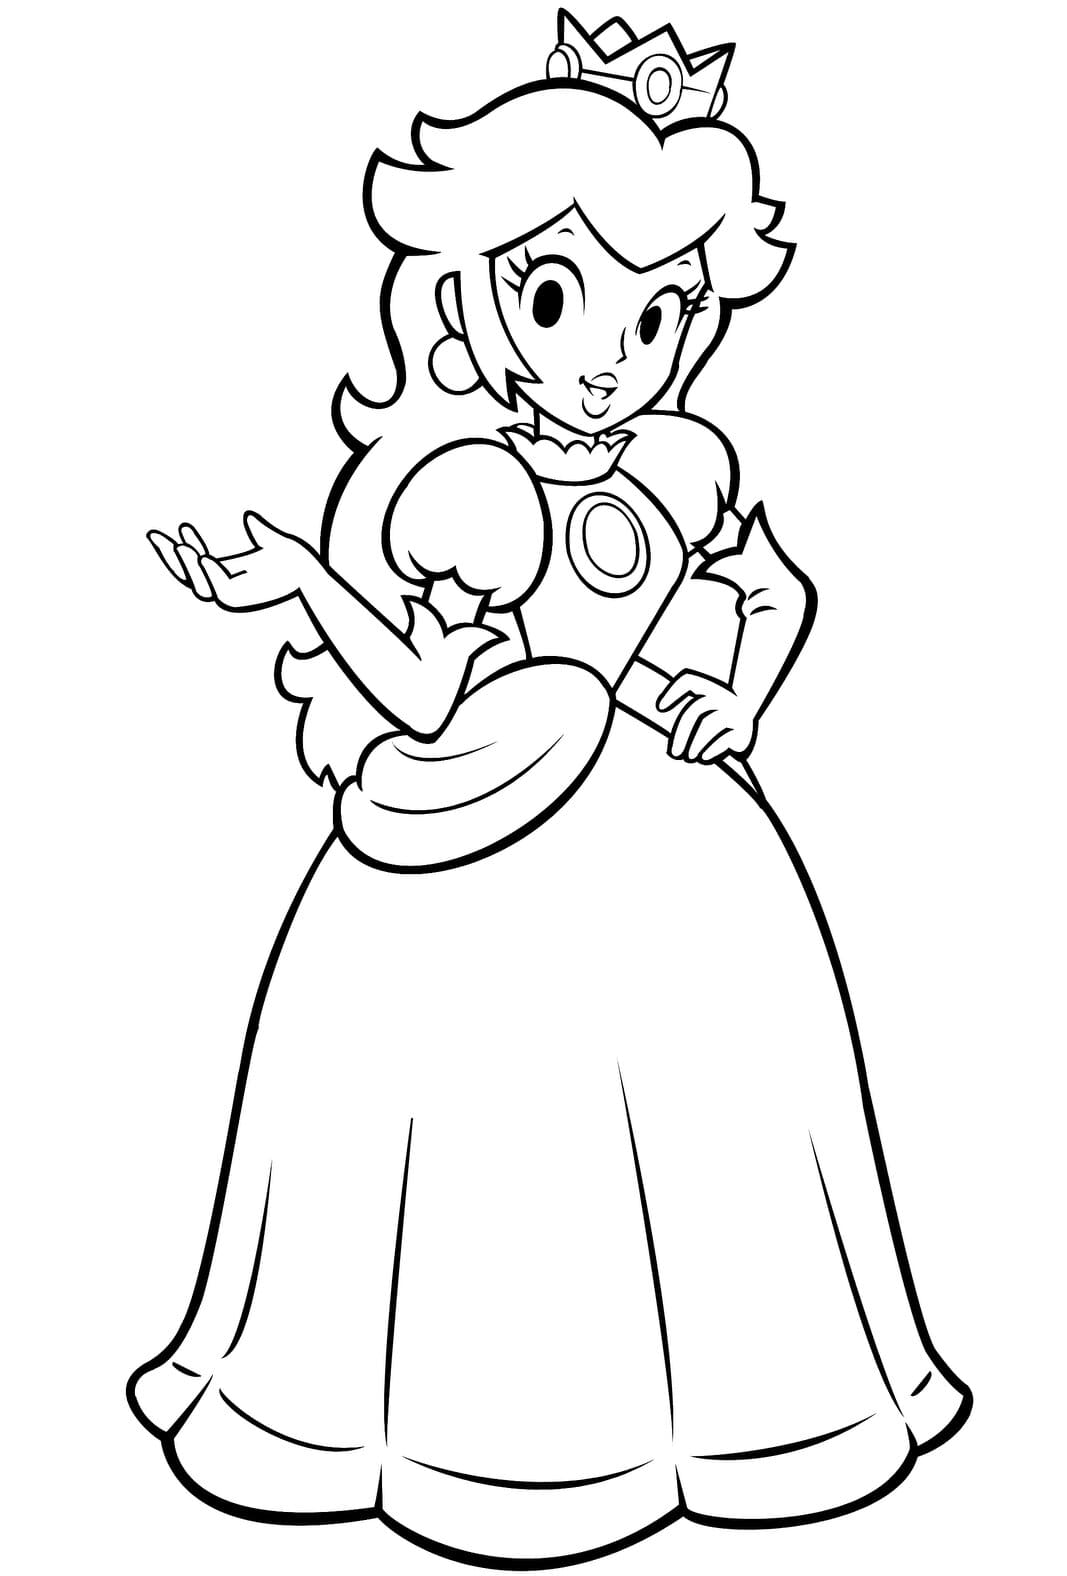 Princess Peach raises her right hand in Super Mario Bros Coloring Page